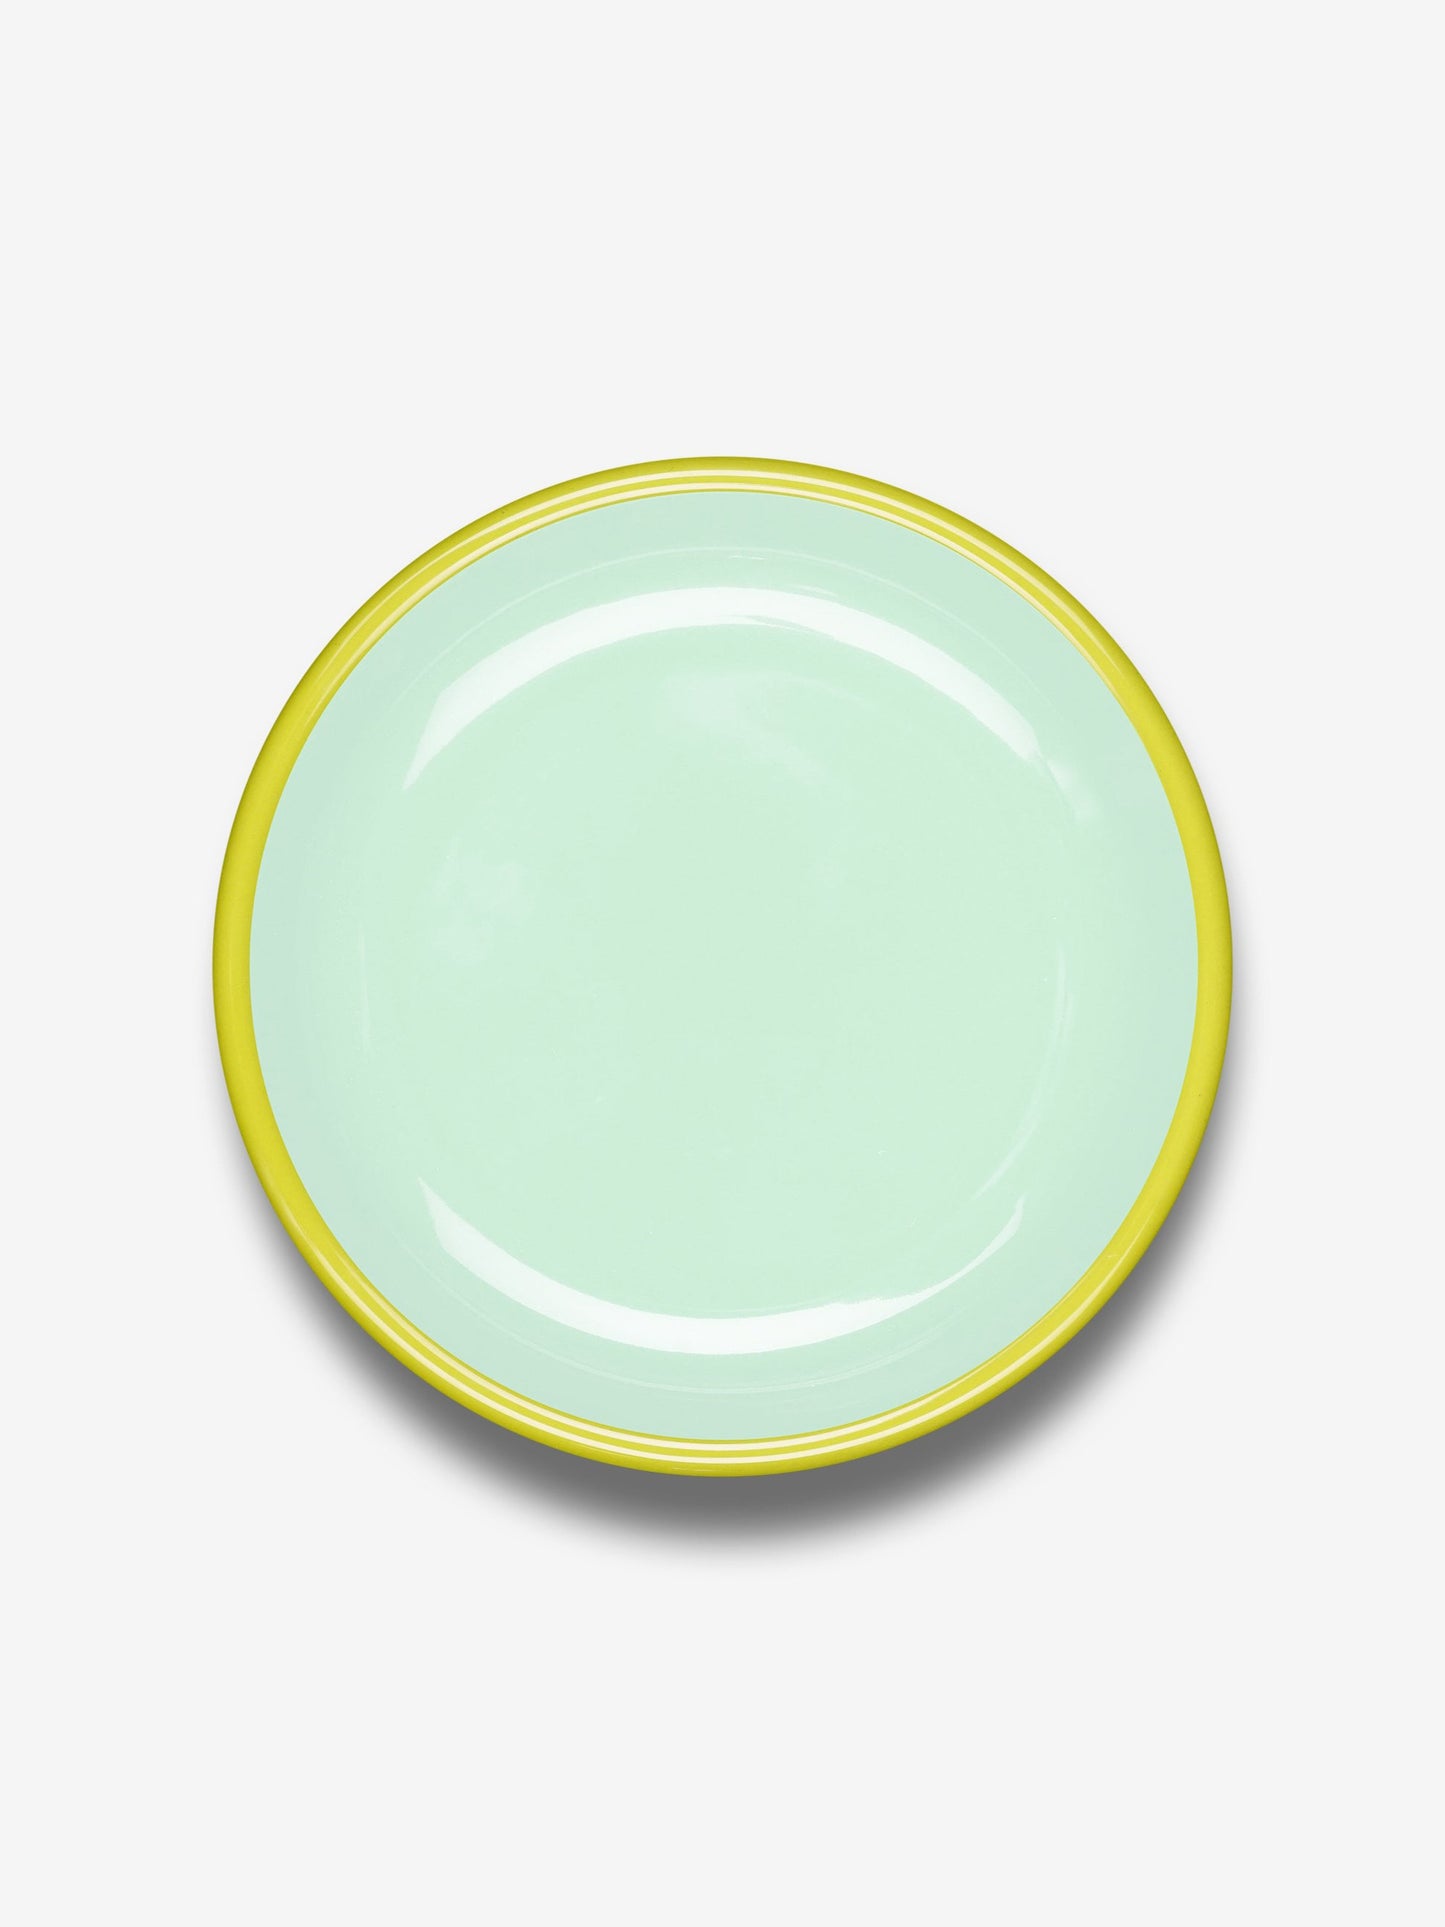 Mint & Olive Colorama Small Enamel Plate